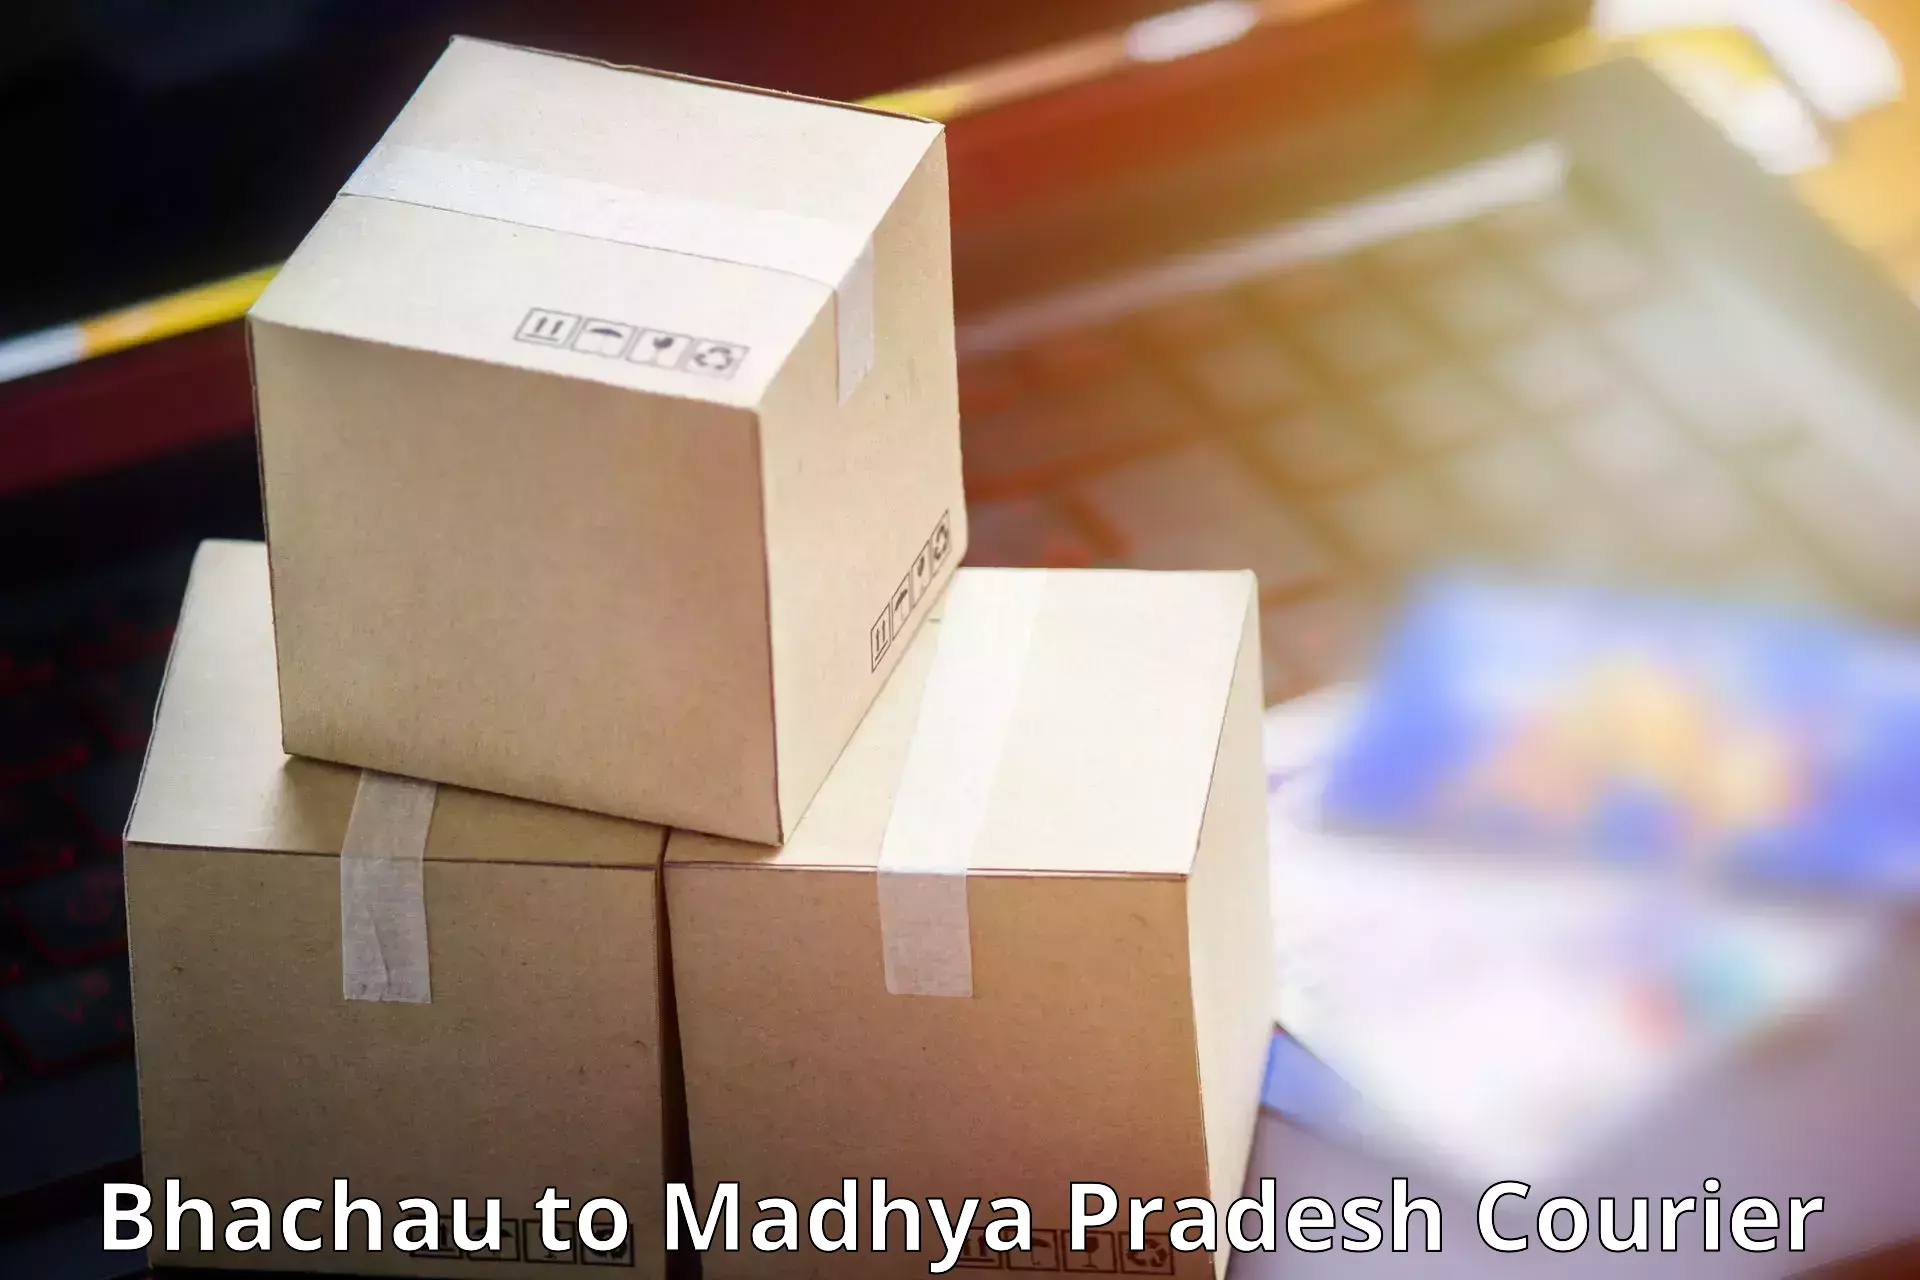 On-call courier service in Bhachau to Shahgarh